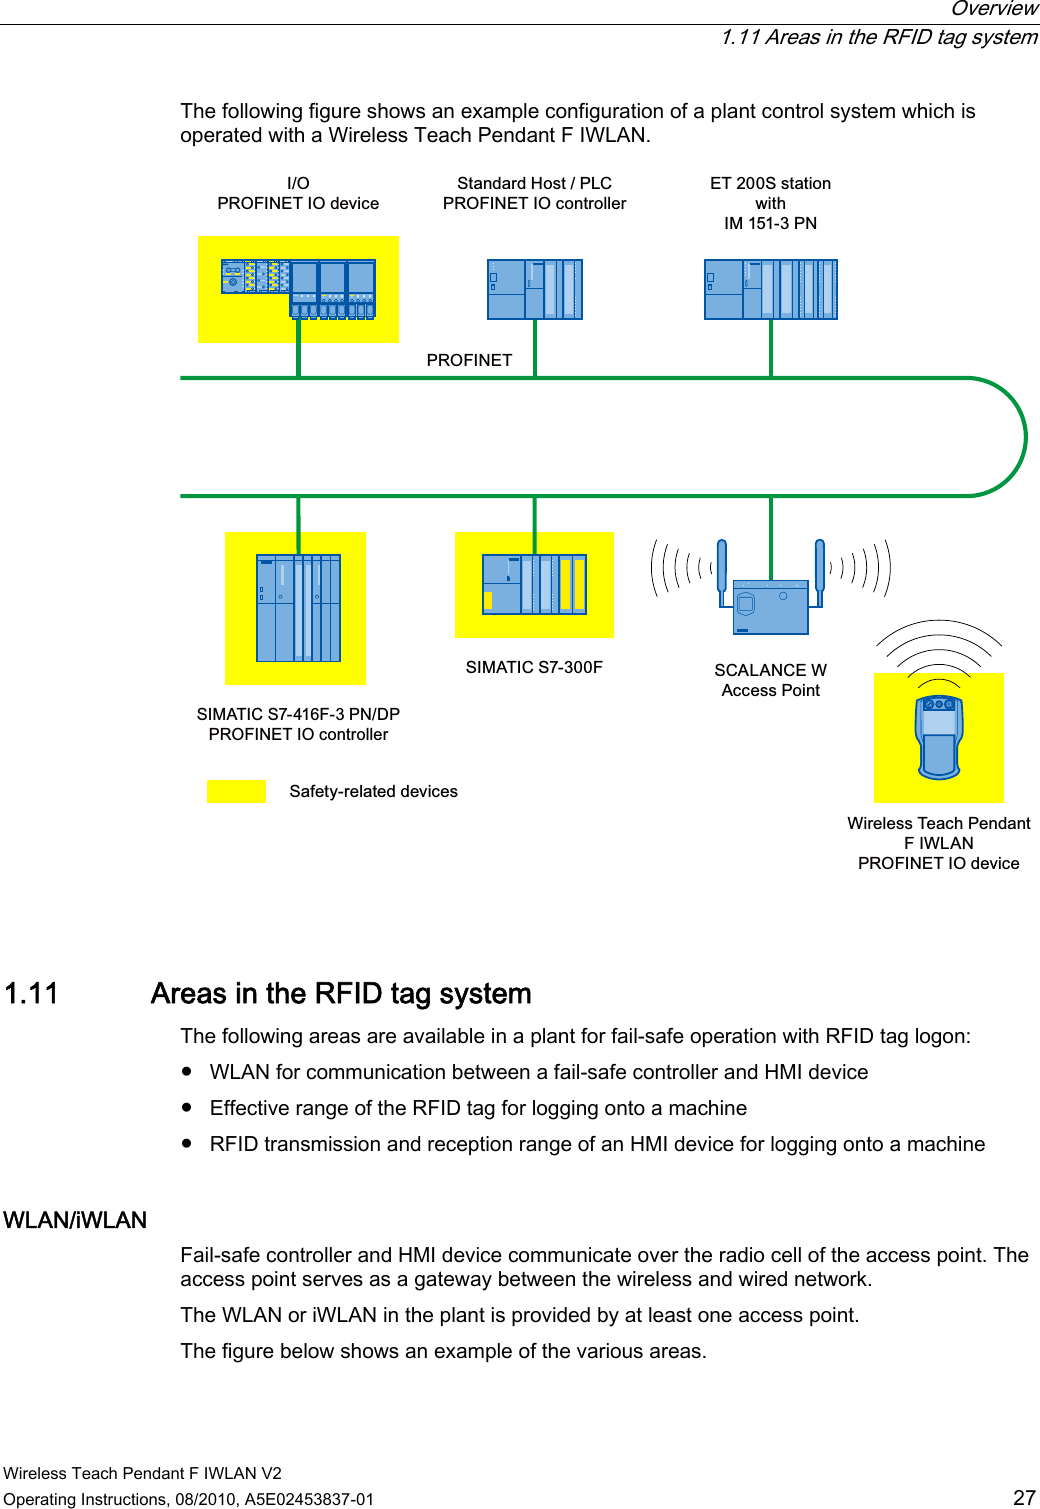  Overview  1.11 Areas in the RFID tag system Wireless Teach Pendant F IWLAN V2 Operating Instructions, 08/2010, A5E02453837-01  27 The following figure shows an example configuration of a plant control system which is operated with a Wireless Teach Pendant F IWLAN. 6DIHW\UHODWHGGHYLFHV6,0$7,&amp;6)31&apos;3352),1(7,2FRQWUROOHU6WDQGDUG+RVW3/&amp;352),1(7,2FRQWUROOHU(7b6VWDWLRQZLWK,031,2352),1(7,2GHYLFH:LUHOHVV7HDFK3HQGDQW),:/$1352),1(7,2GHYLFH352),1(76&amp;$/$1&amp;(:$FFHVV3RLQW6,0$7,&amp;6) 1.11 Areas in the RFID tag system The following areas are available in a plant for fail-safe operation with RFID tag logon: ●  WLAN for communication between a fail-safe controller and HMI device ●  Effective range of the RFID tag for logging onto a machine ●  RFID transmission and reception range of an HMI device for logging onto a machine WLAN/iWLAN  Fail-safe controller and HMI device communicate over the radio cell of the access point. The access point serves as a gateway between the wireless and wired network. The WLAN or iWLAN in the plant is provided by at least one access point. The figure below shows an example of the various areas. PRELIMINARY II 1.7.2010